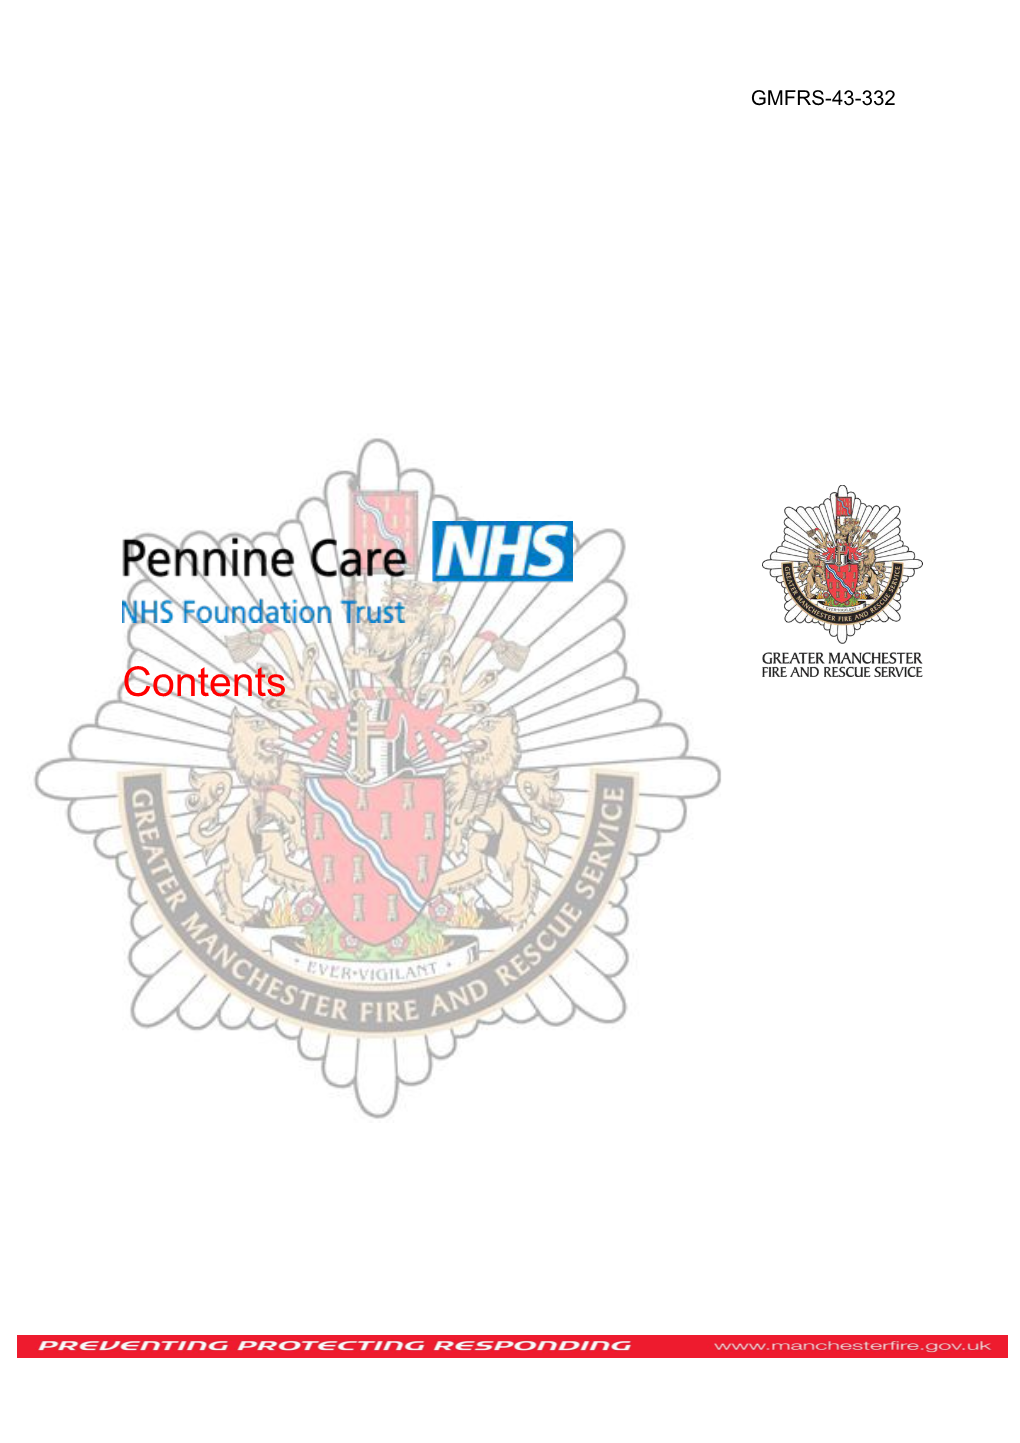 Greater Manchester Fire and Rescue Service and Pennine Care NHS Foundation Trust